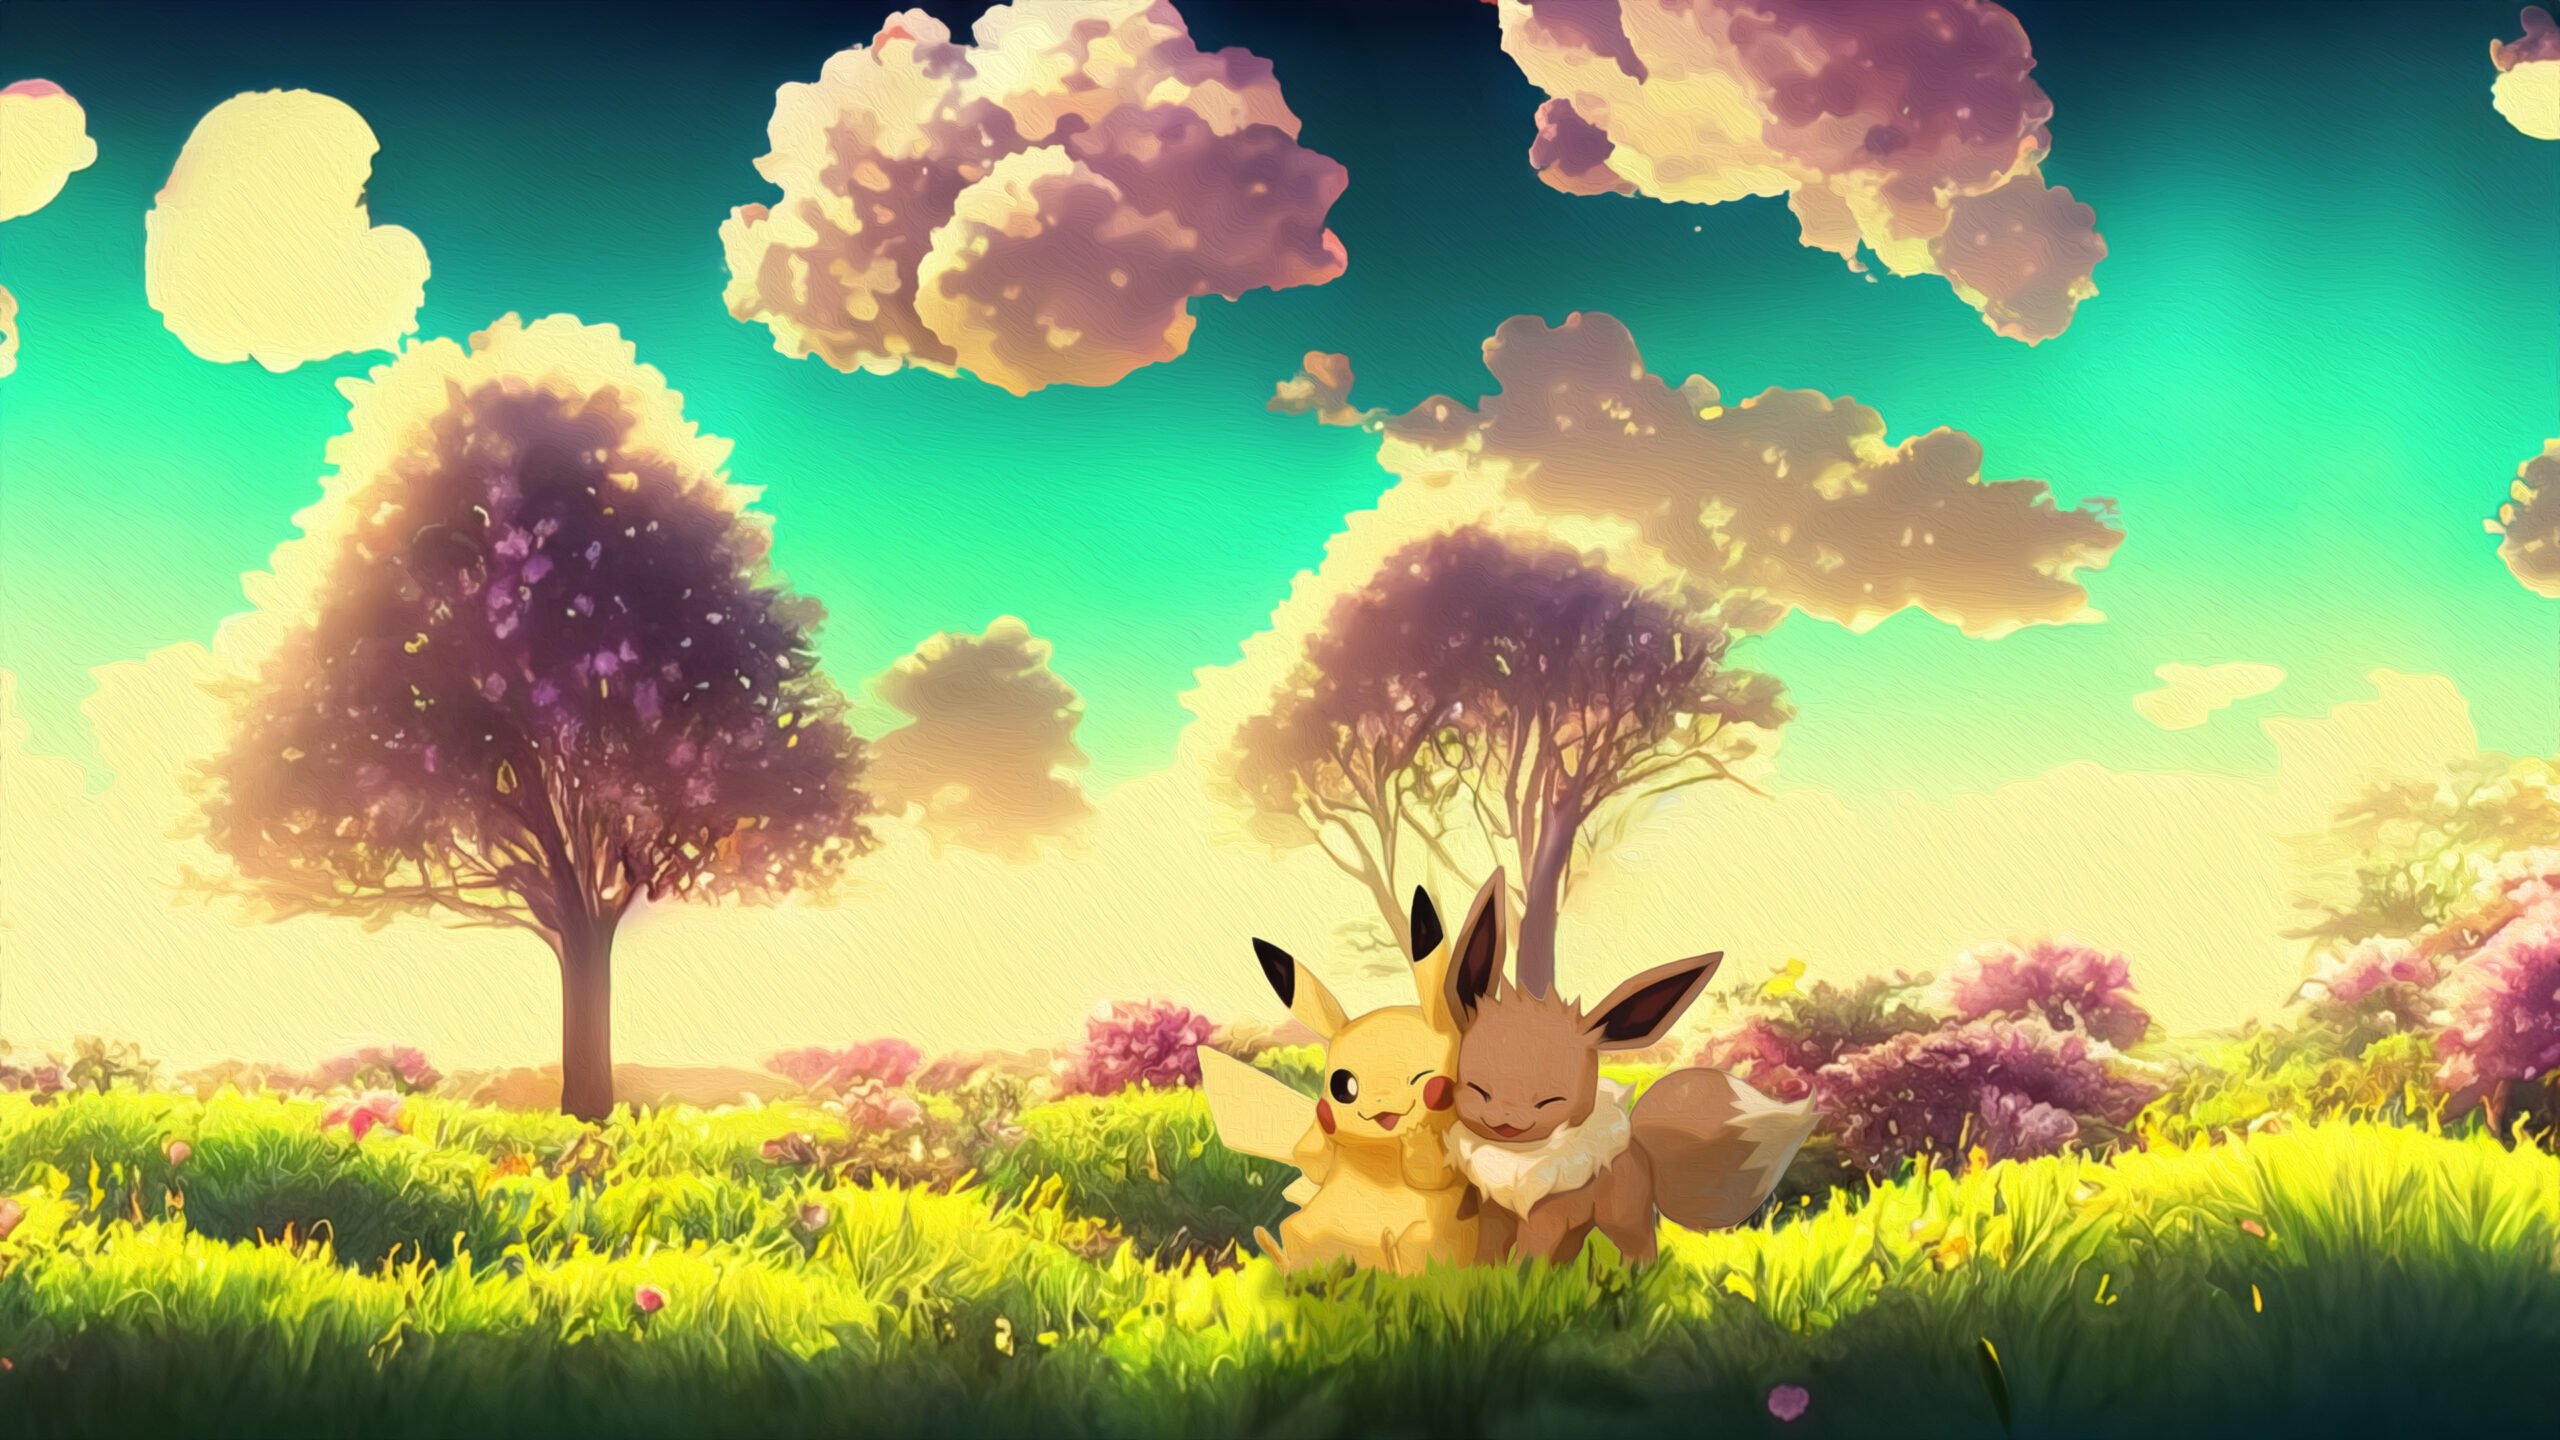 Pikachu and Eevee hugging – Free Download of a Pokémon Wallpaper of Pikachu and Eevee in 4k - for mobile, desktop and tablet